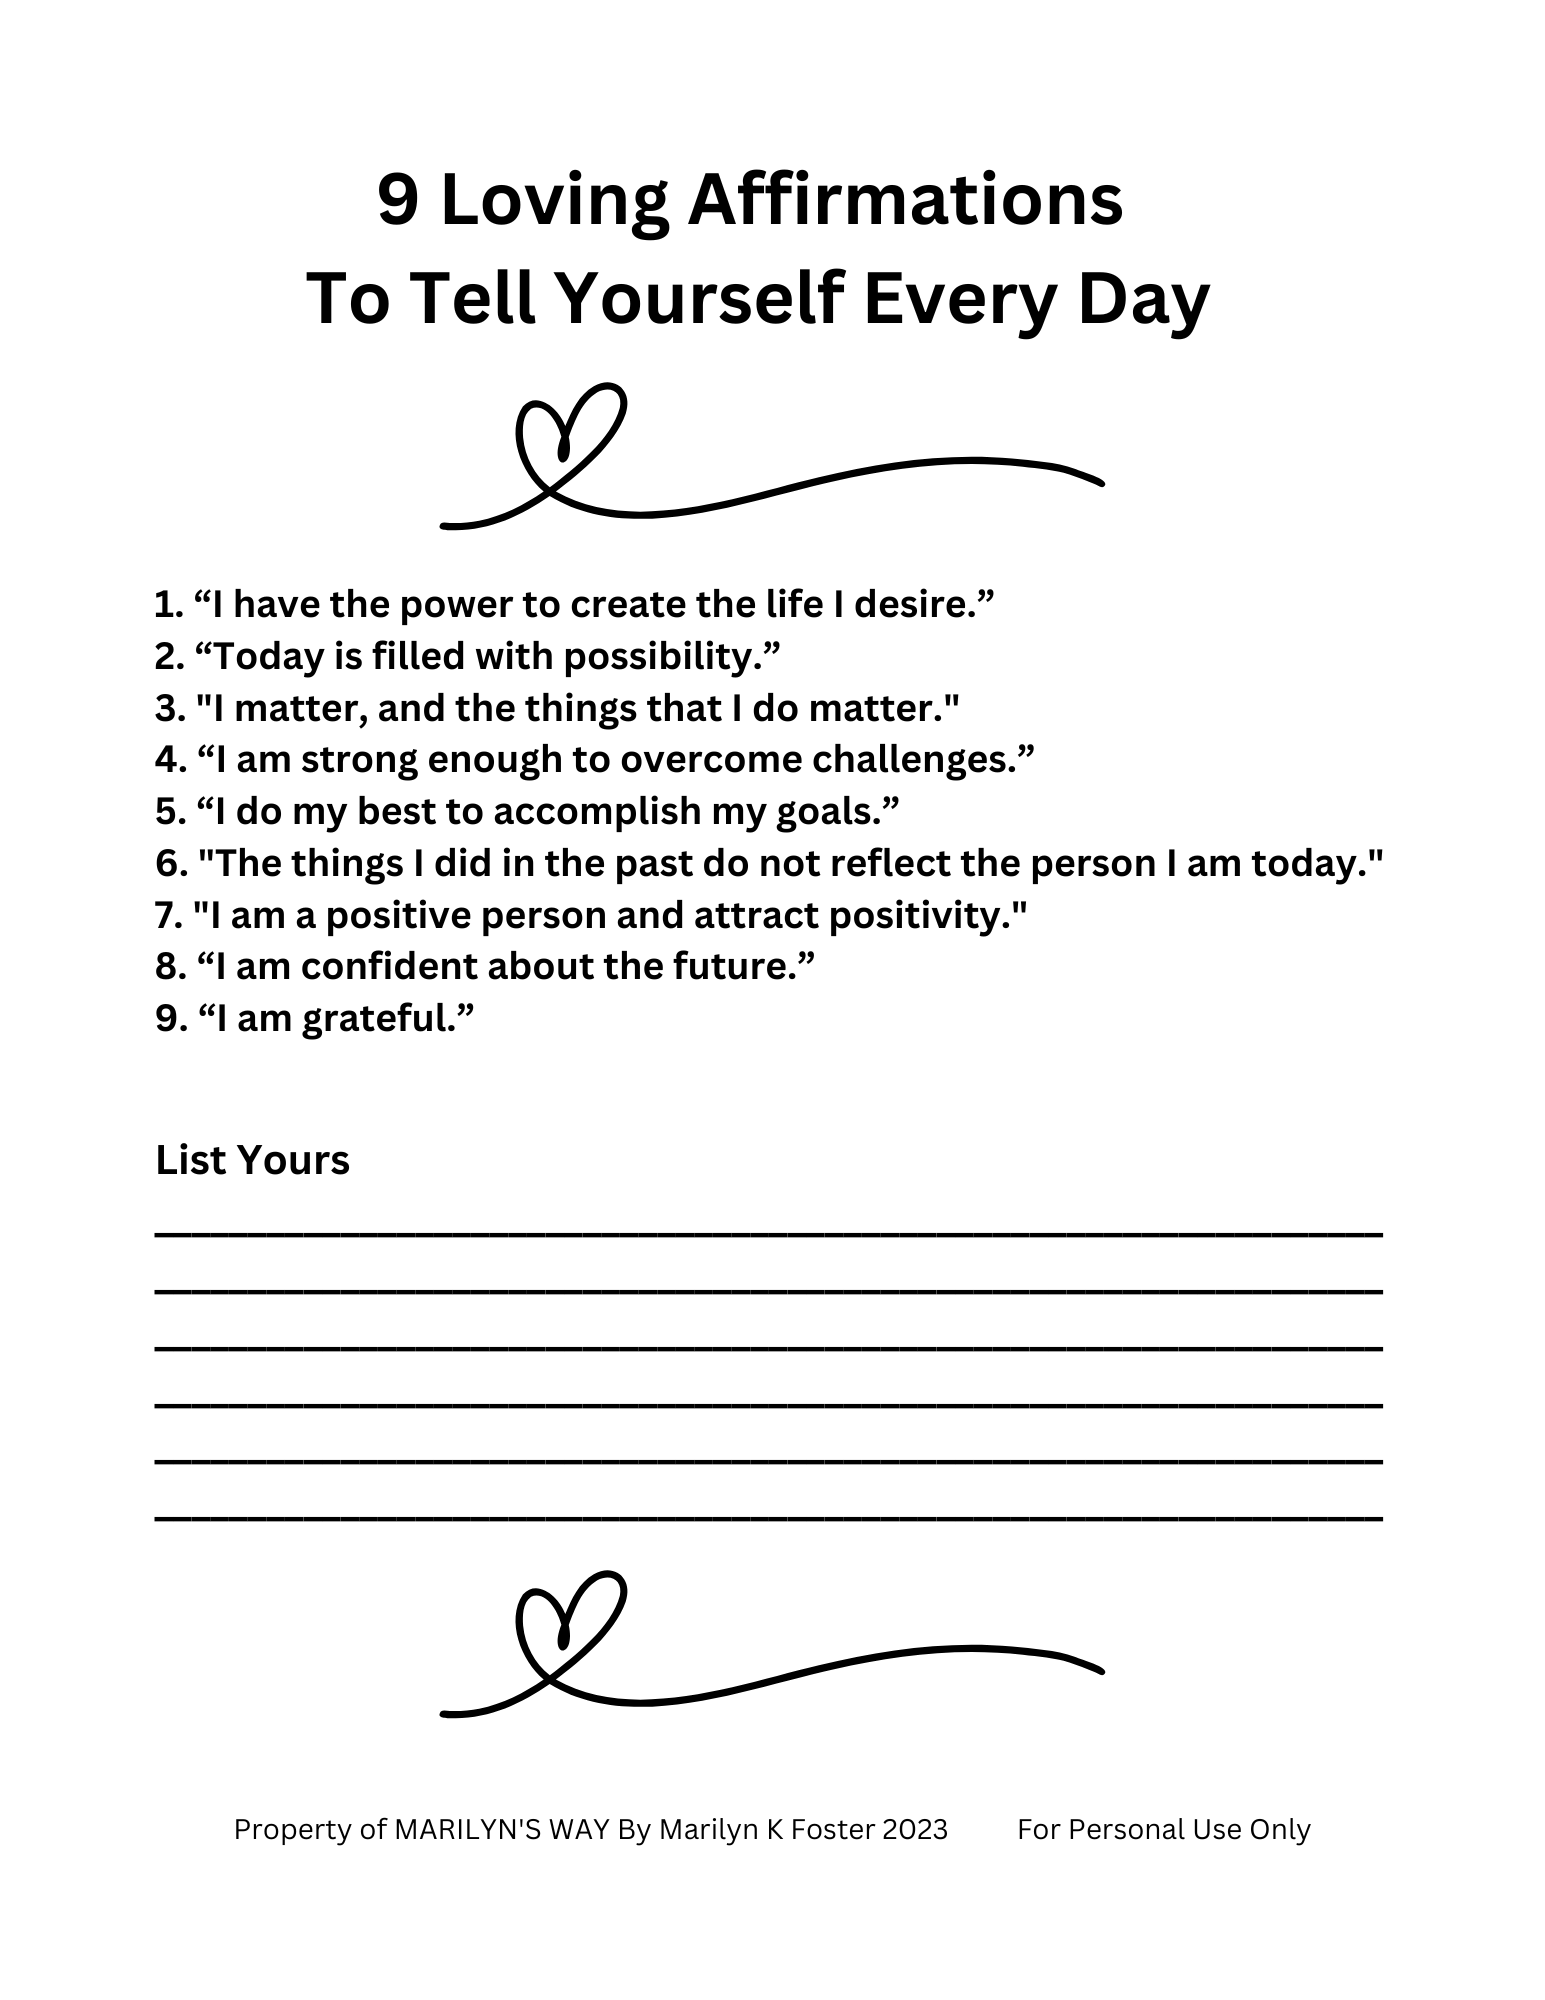 9 Loving Affirmations To Tell Yourself Every Day - Marilyn's Way